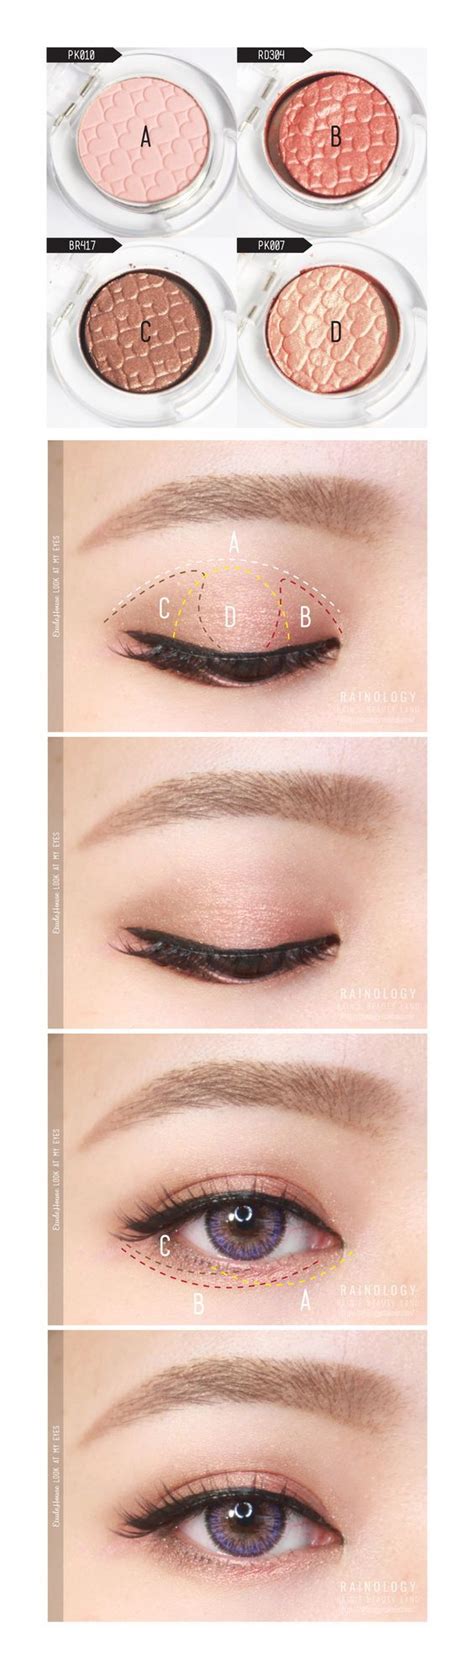 Discover how to blend your eyeshadow beautifully by following our step by step guide, below. This step-by-step guide to applying eyeshadow makes your ...